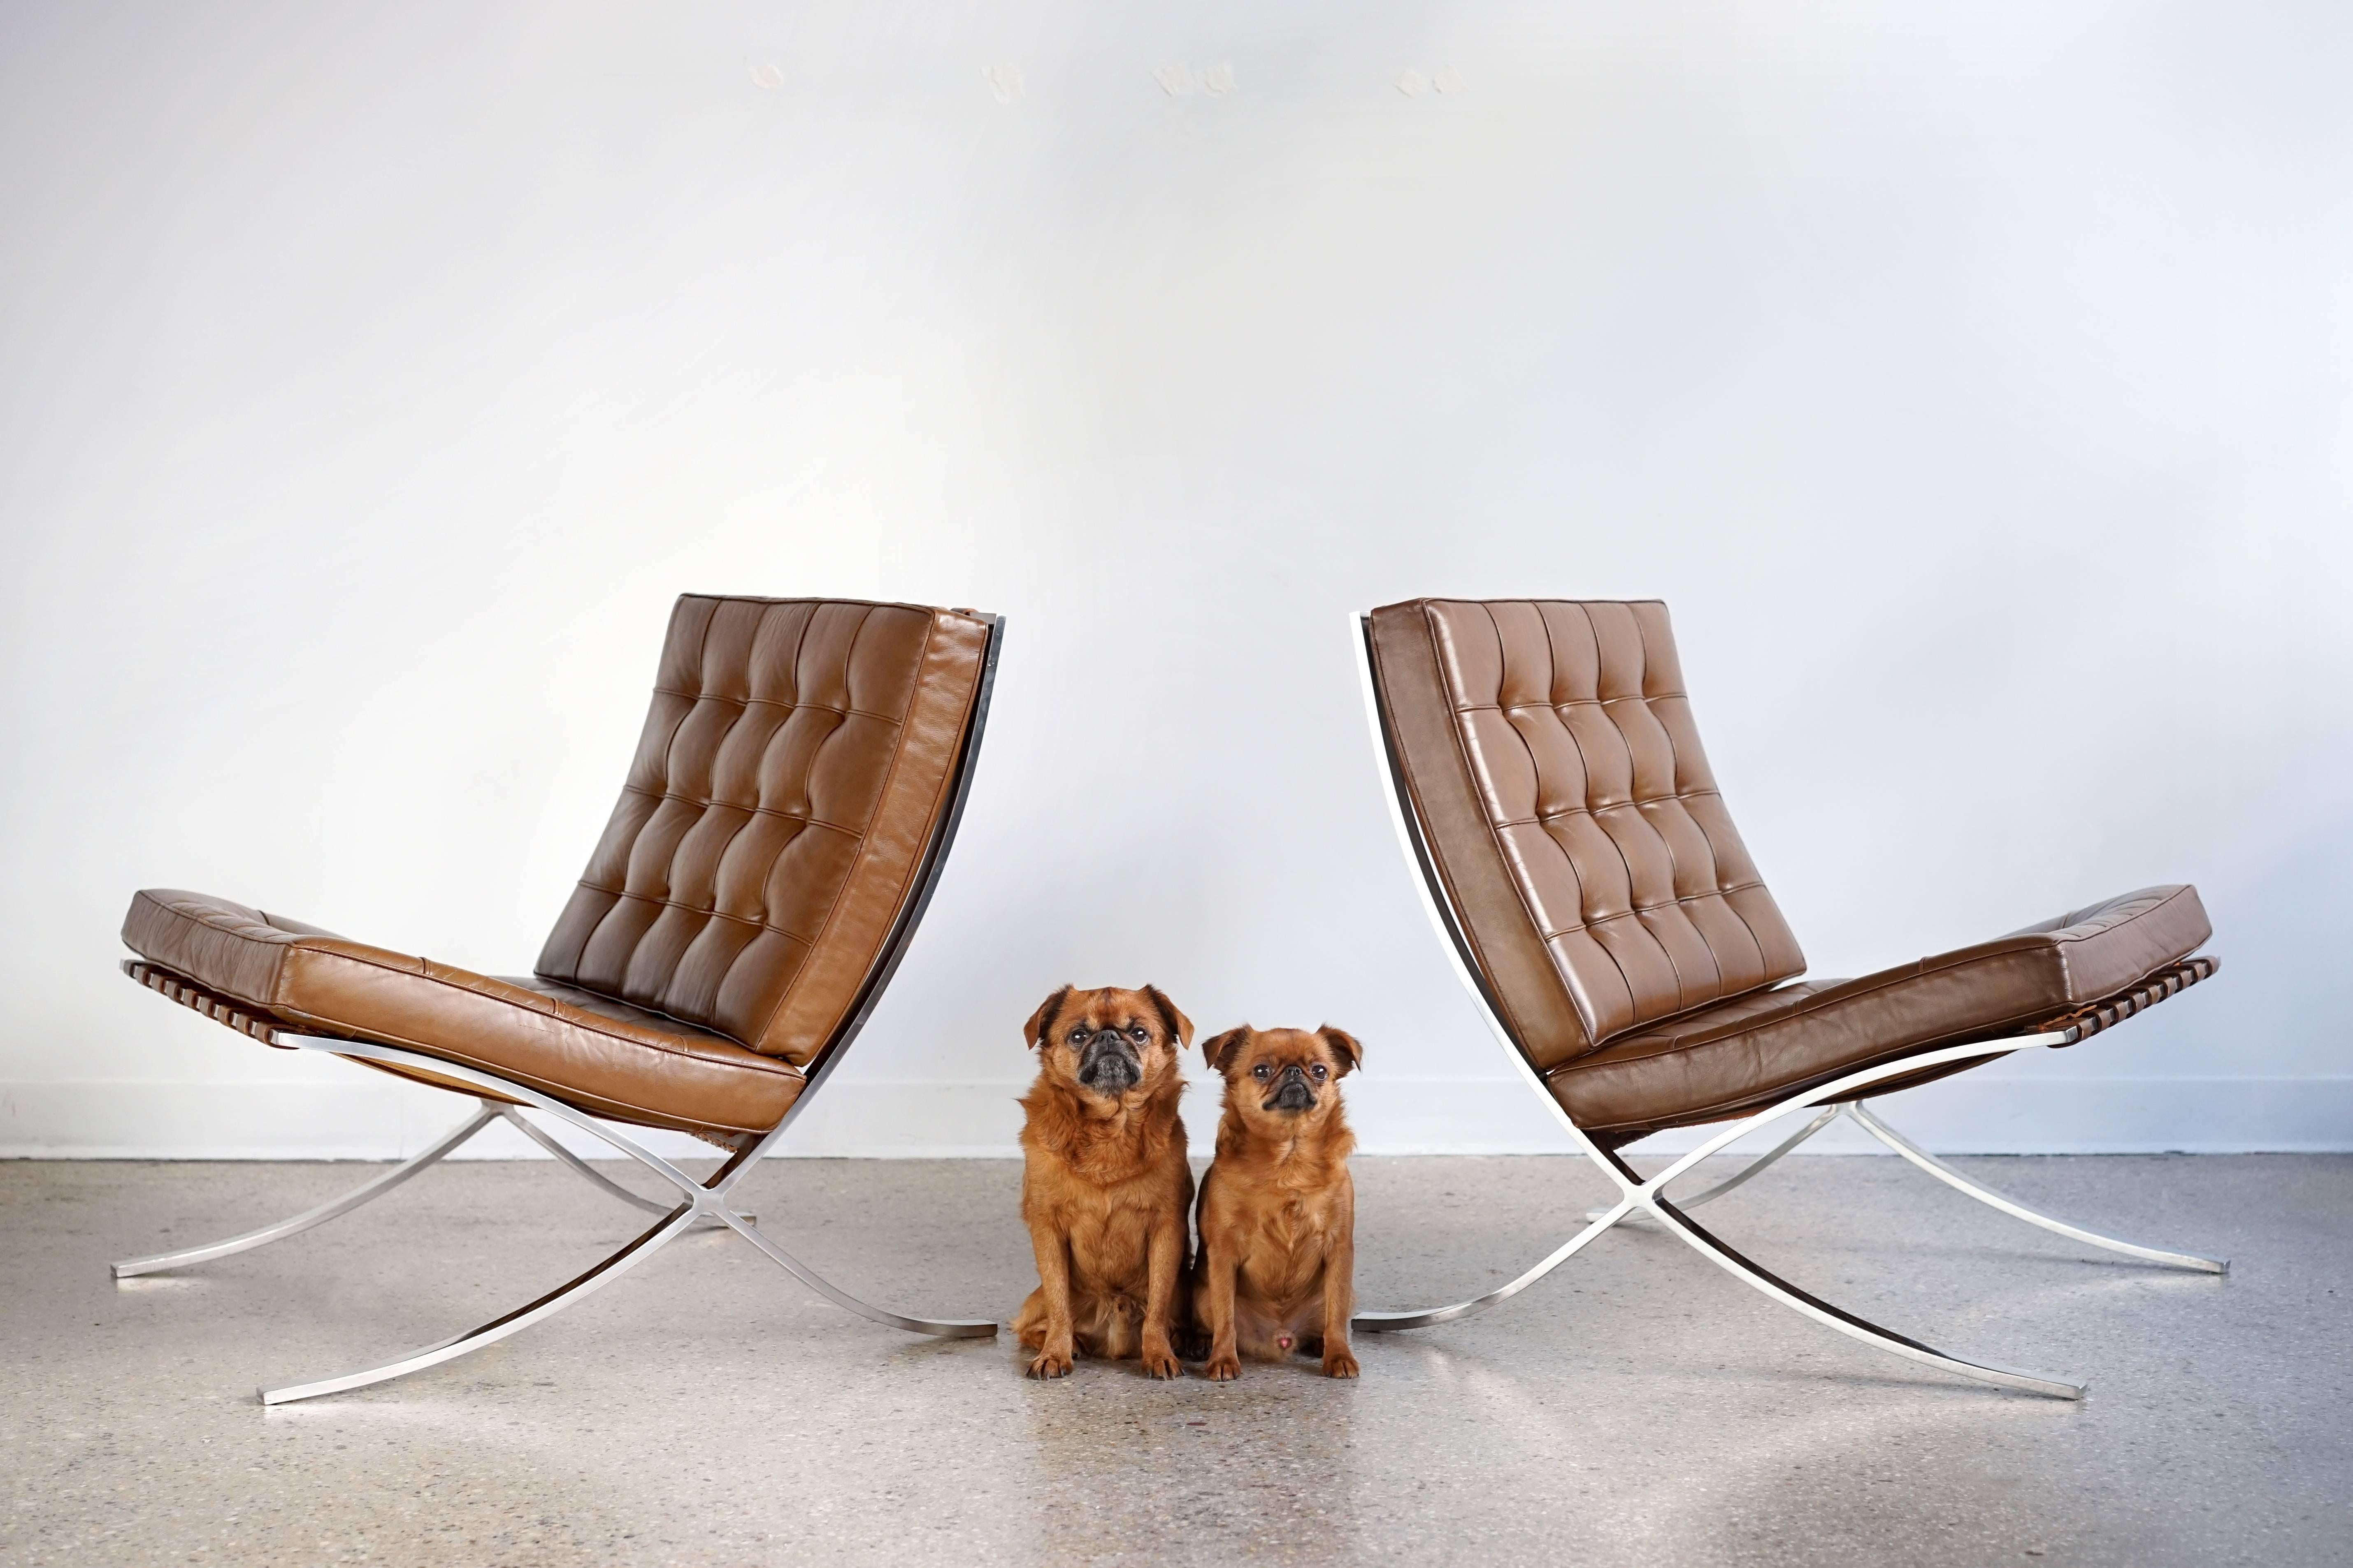 Luxurious, iconic pair in fine, all original condition with original Knoll labels as shown. Bright polished steel frames. Quilted leather cushions suspended on leather straps. Originally designed in 1929, this authentic pair was manufactured by